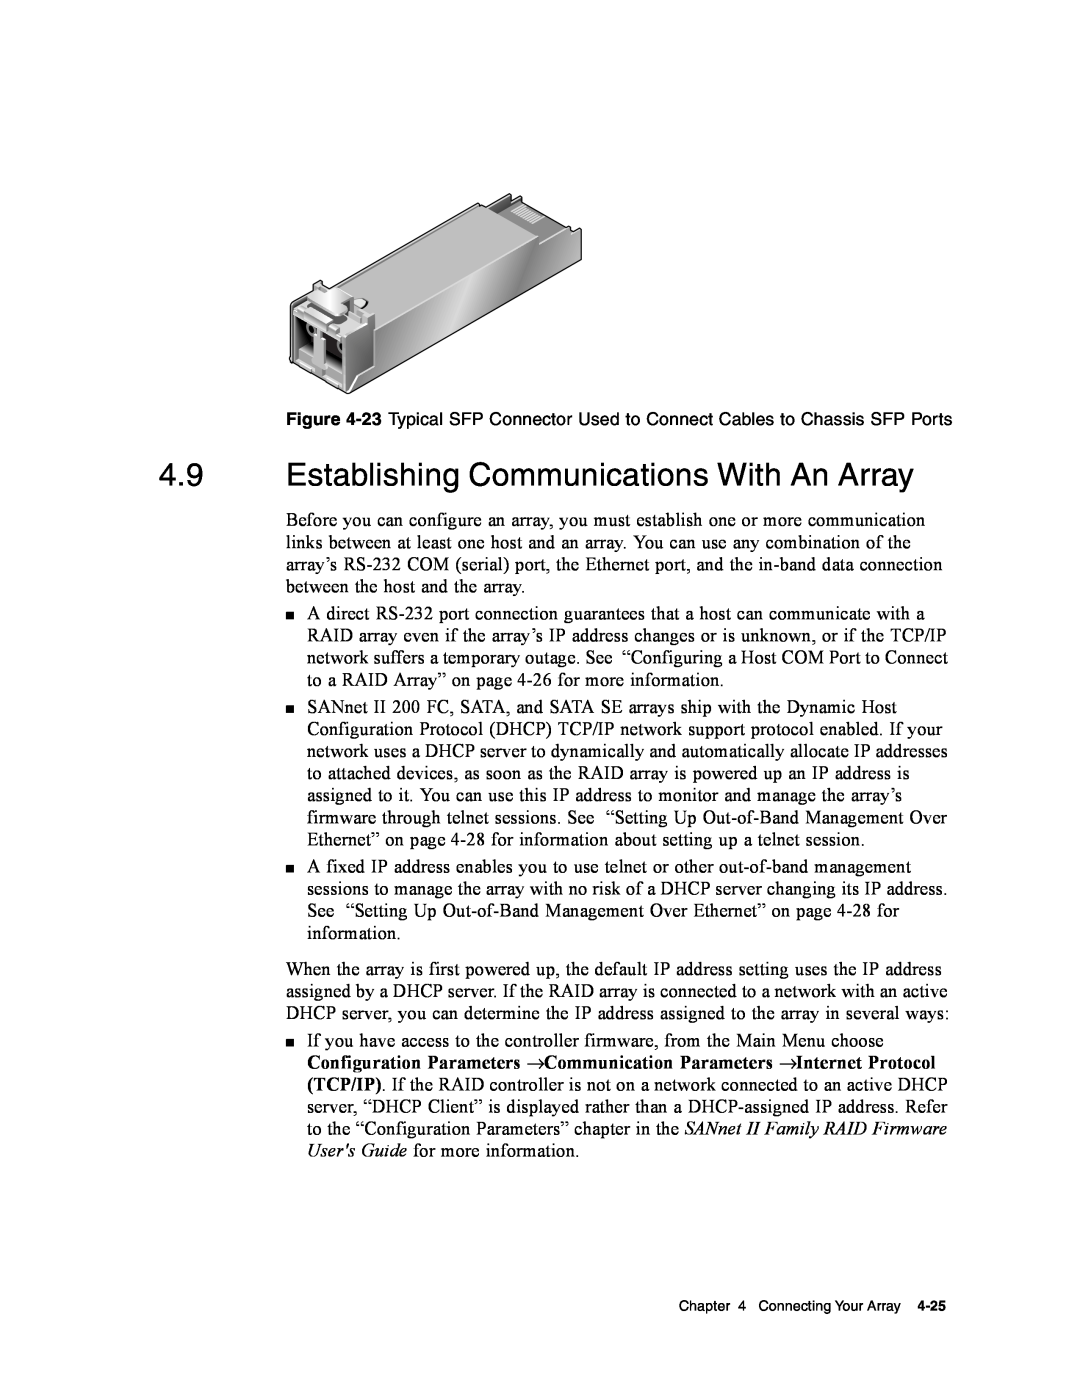 Dot Hill Systems II 200 FC service manual Establishing Communications With An Array 